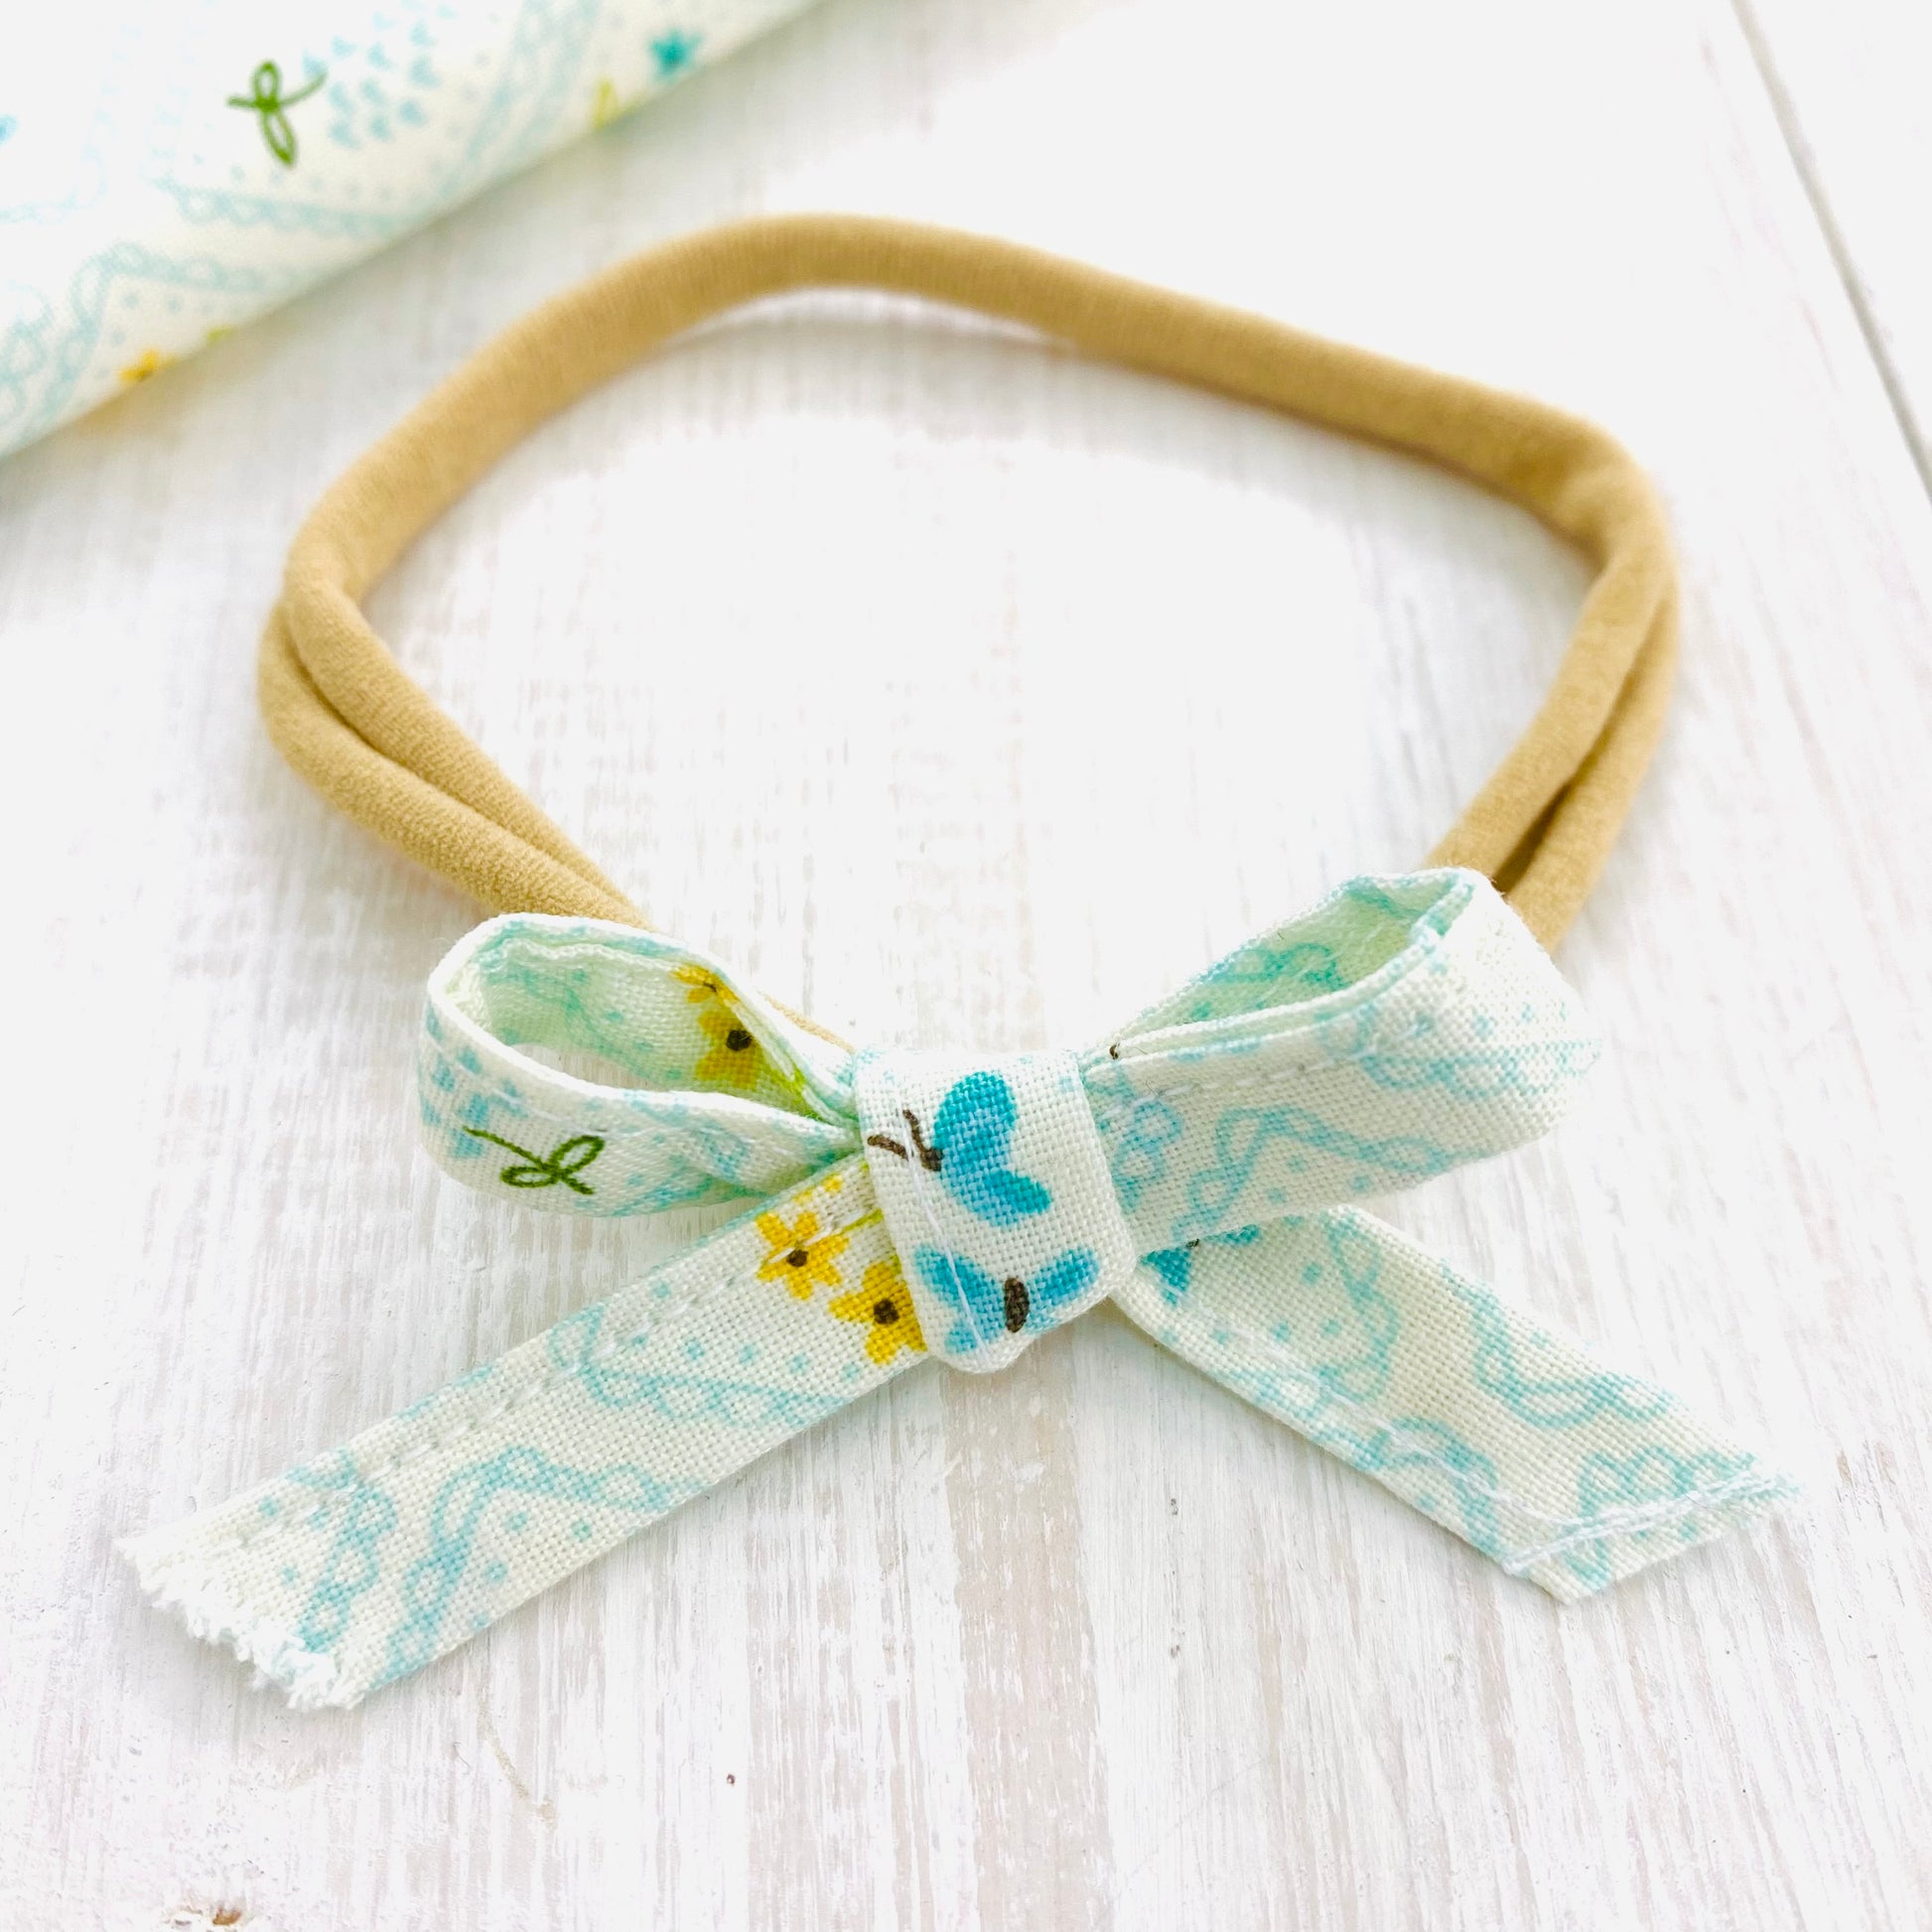 Hand tied baby bow headband in blue floral with butterfly.